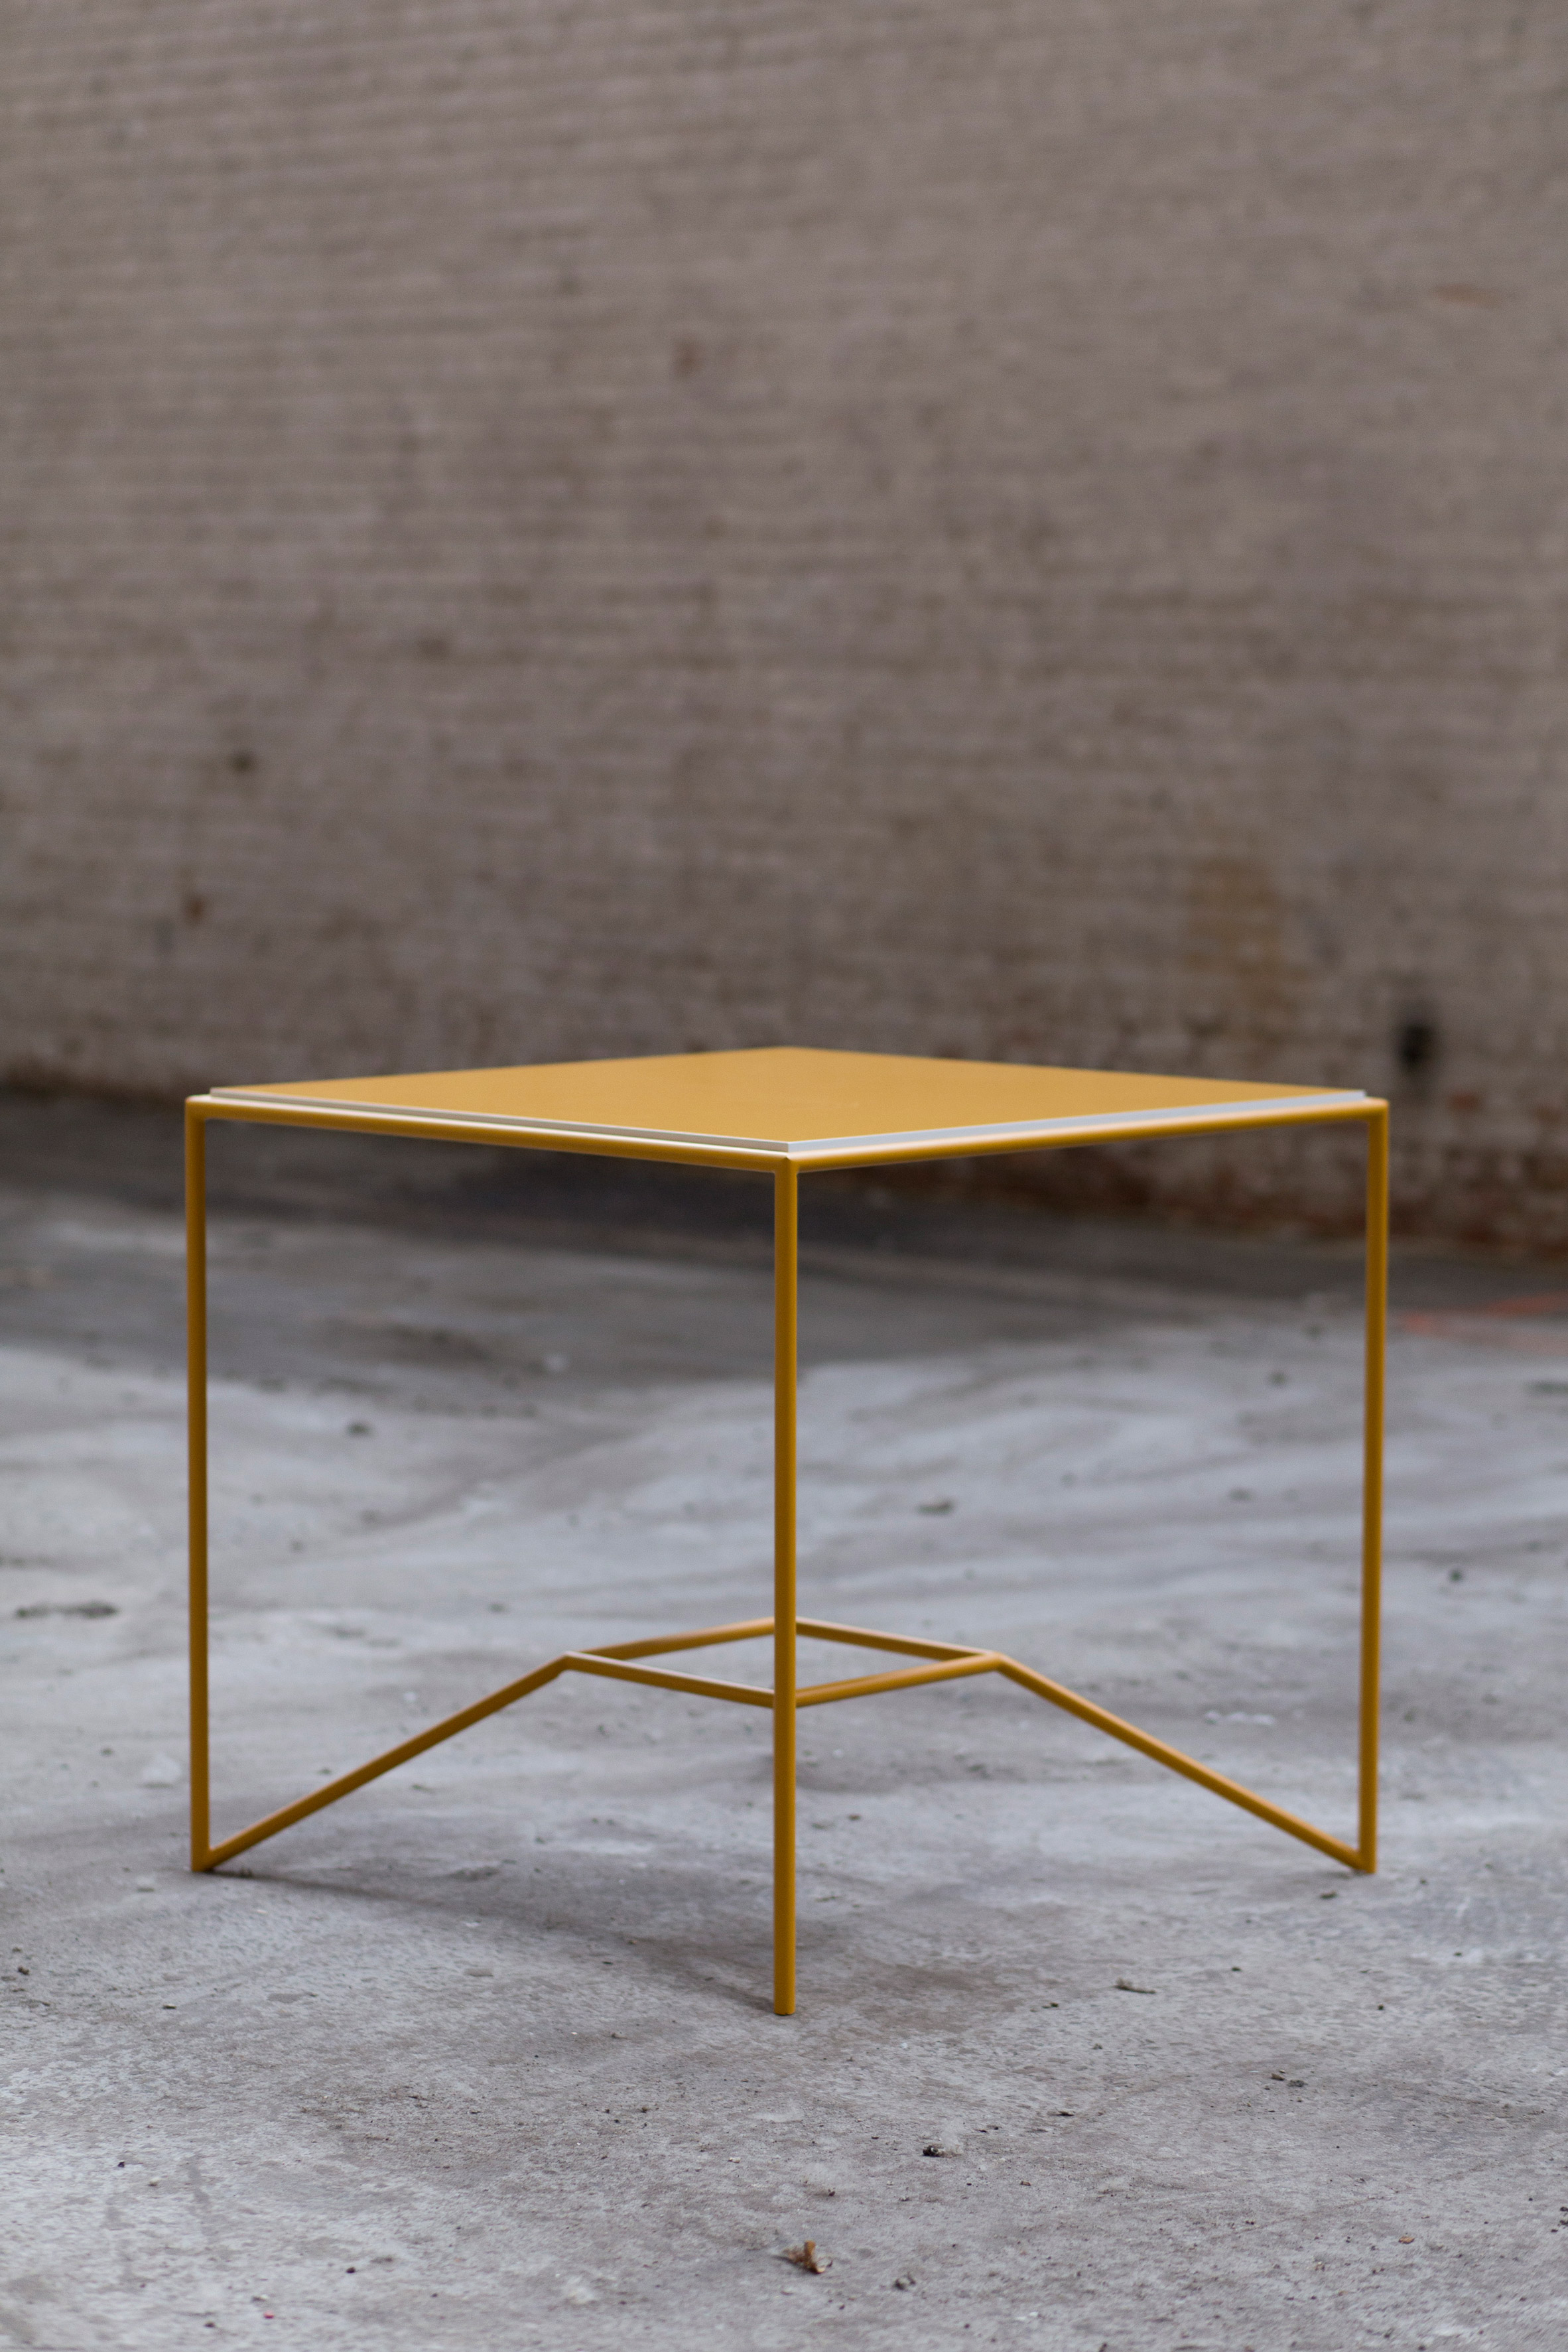 Maria Scarpulla's tables with flippable tops are designed to suit your mood